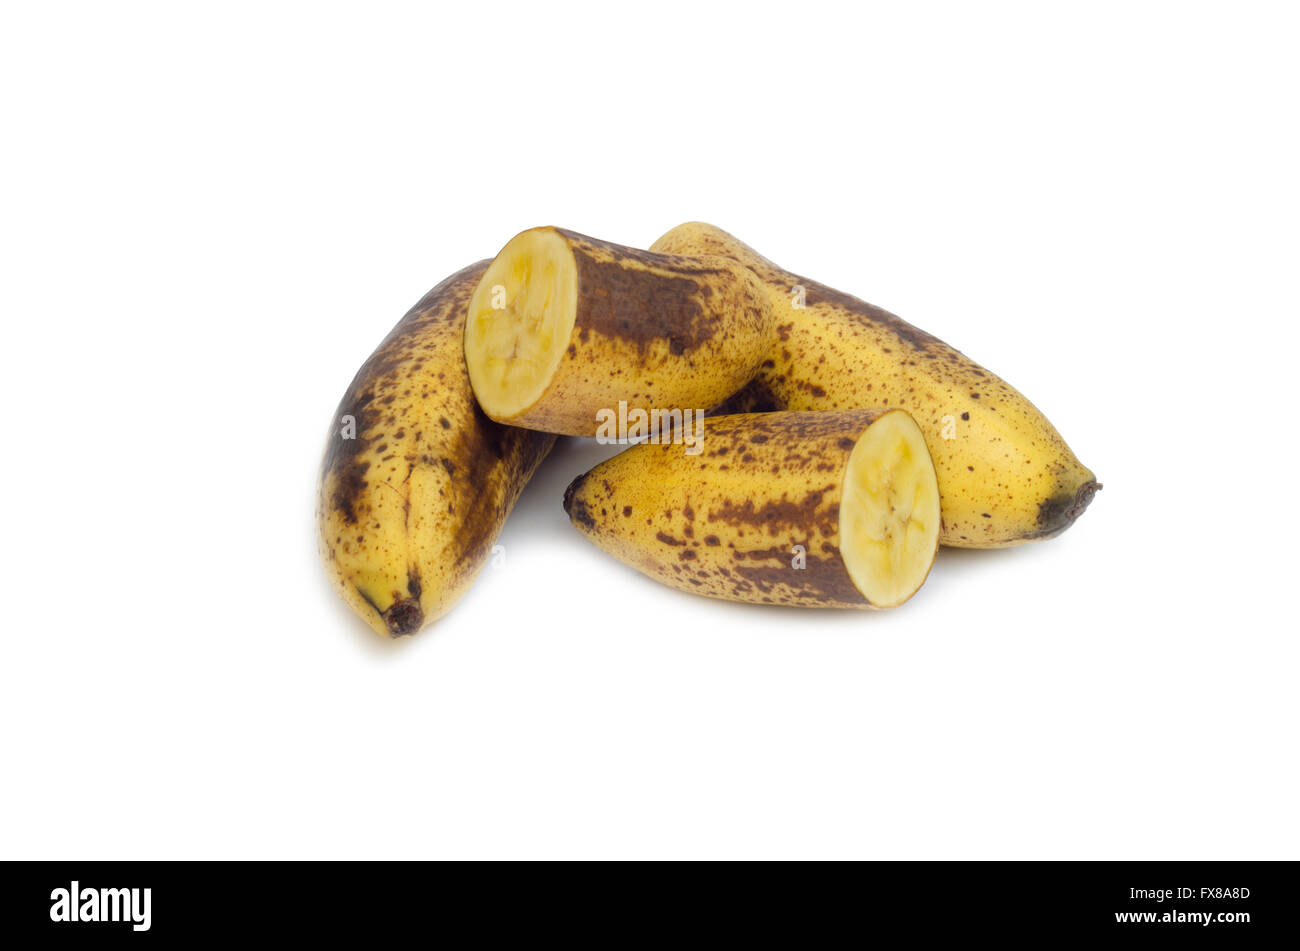 ripe banana (The fully ripe banana produces a substance called Tumor Necrosis Factor (TNF) which has the ability to combat abnor Stock Photo